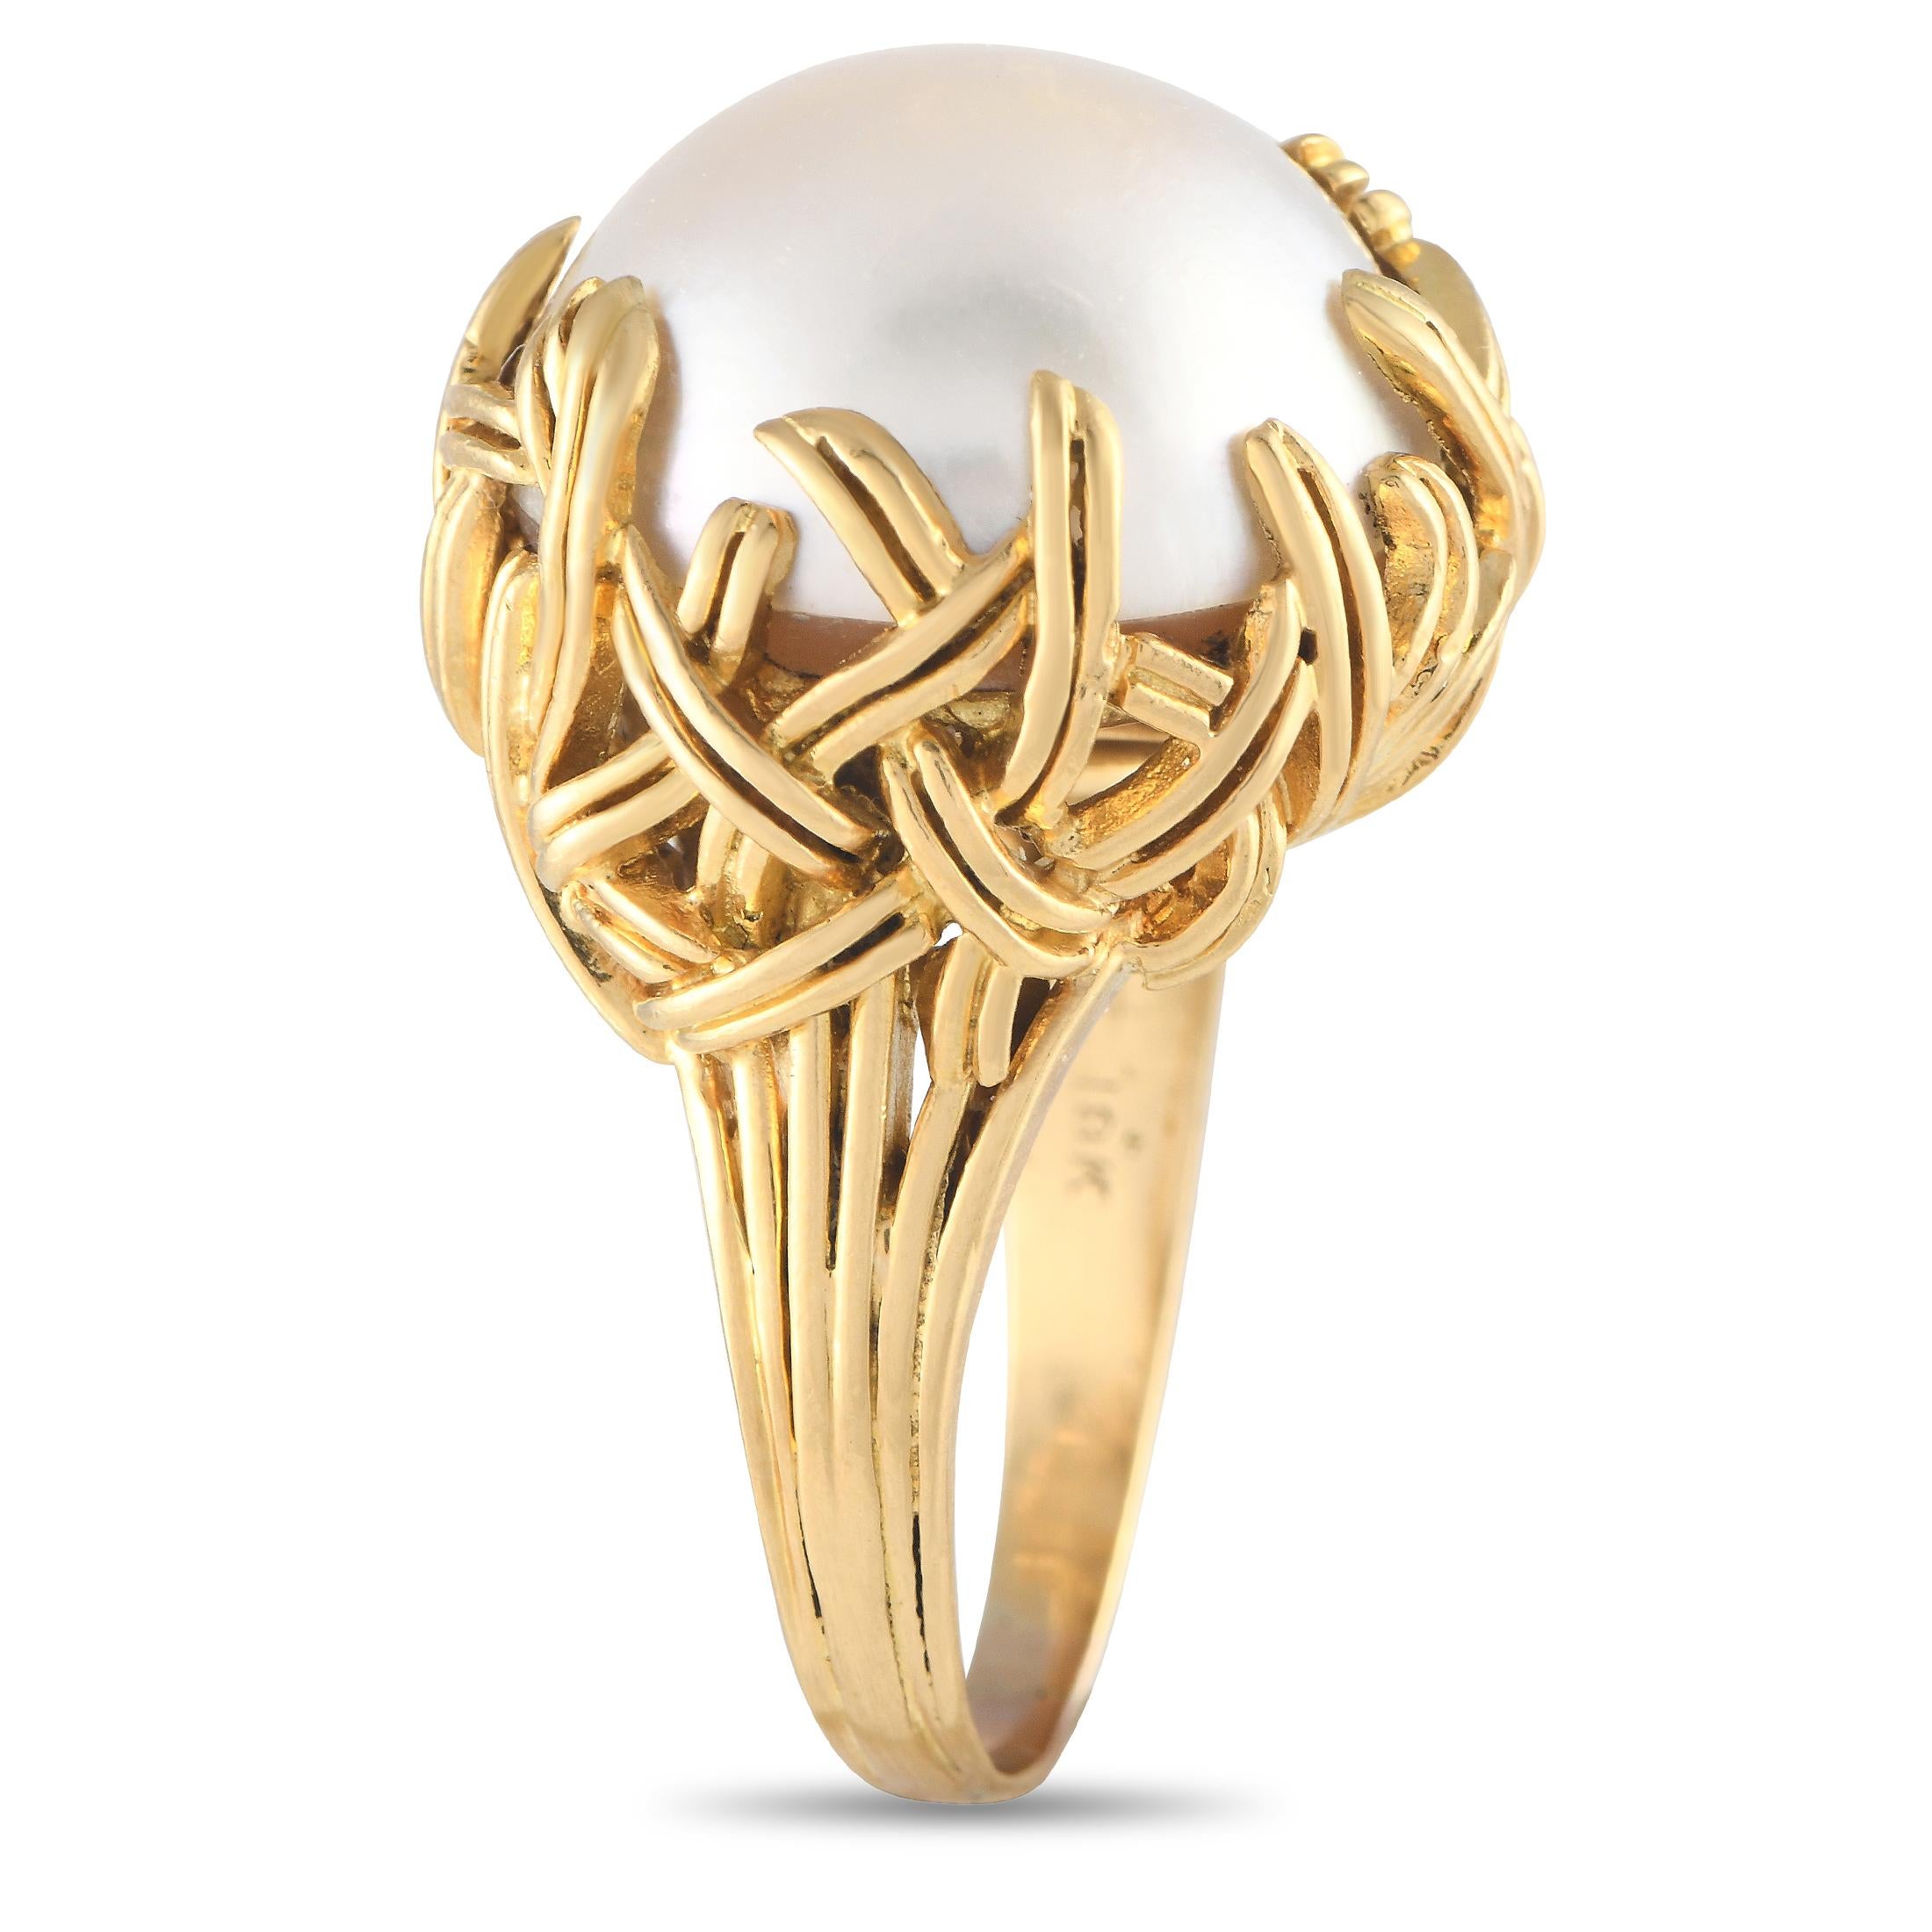 A gorgeous heirloom piece. This Tiffany & Co. ring intrigues with its beautiful mab pearl cradled by a stylized woven basket in 18K yellow gold. The ring's top dimensions measure 17mm by 19mm. Offered in estate condition, this signed Tiffany & Co.